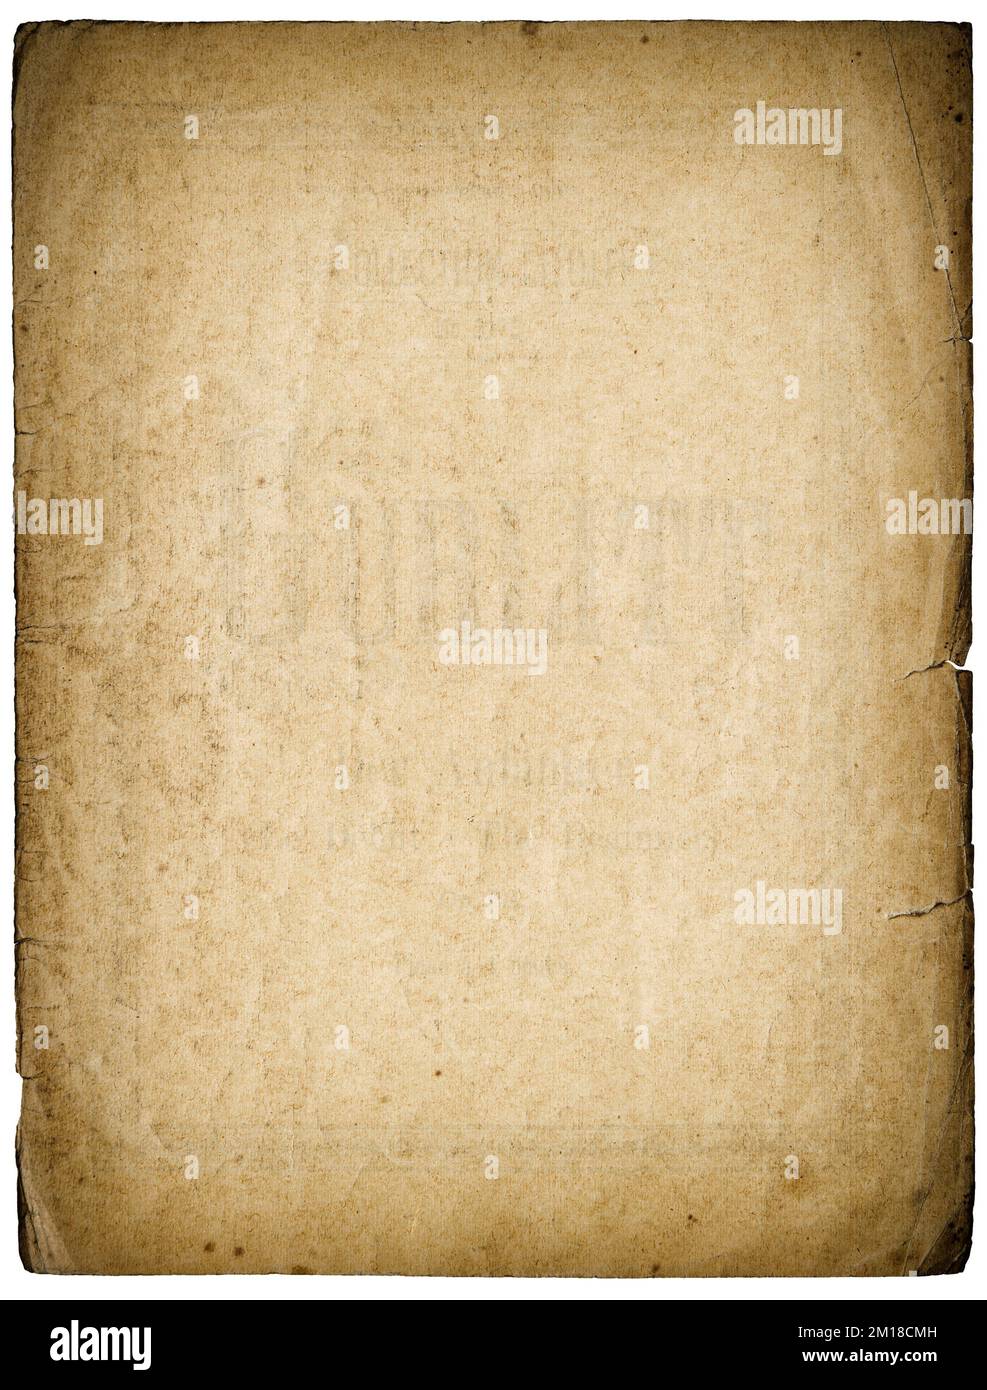 Old grungy paper sheet isolated Used paper texture background Stock Photo